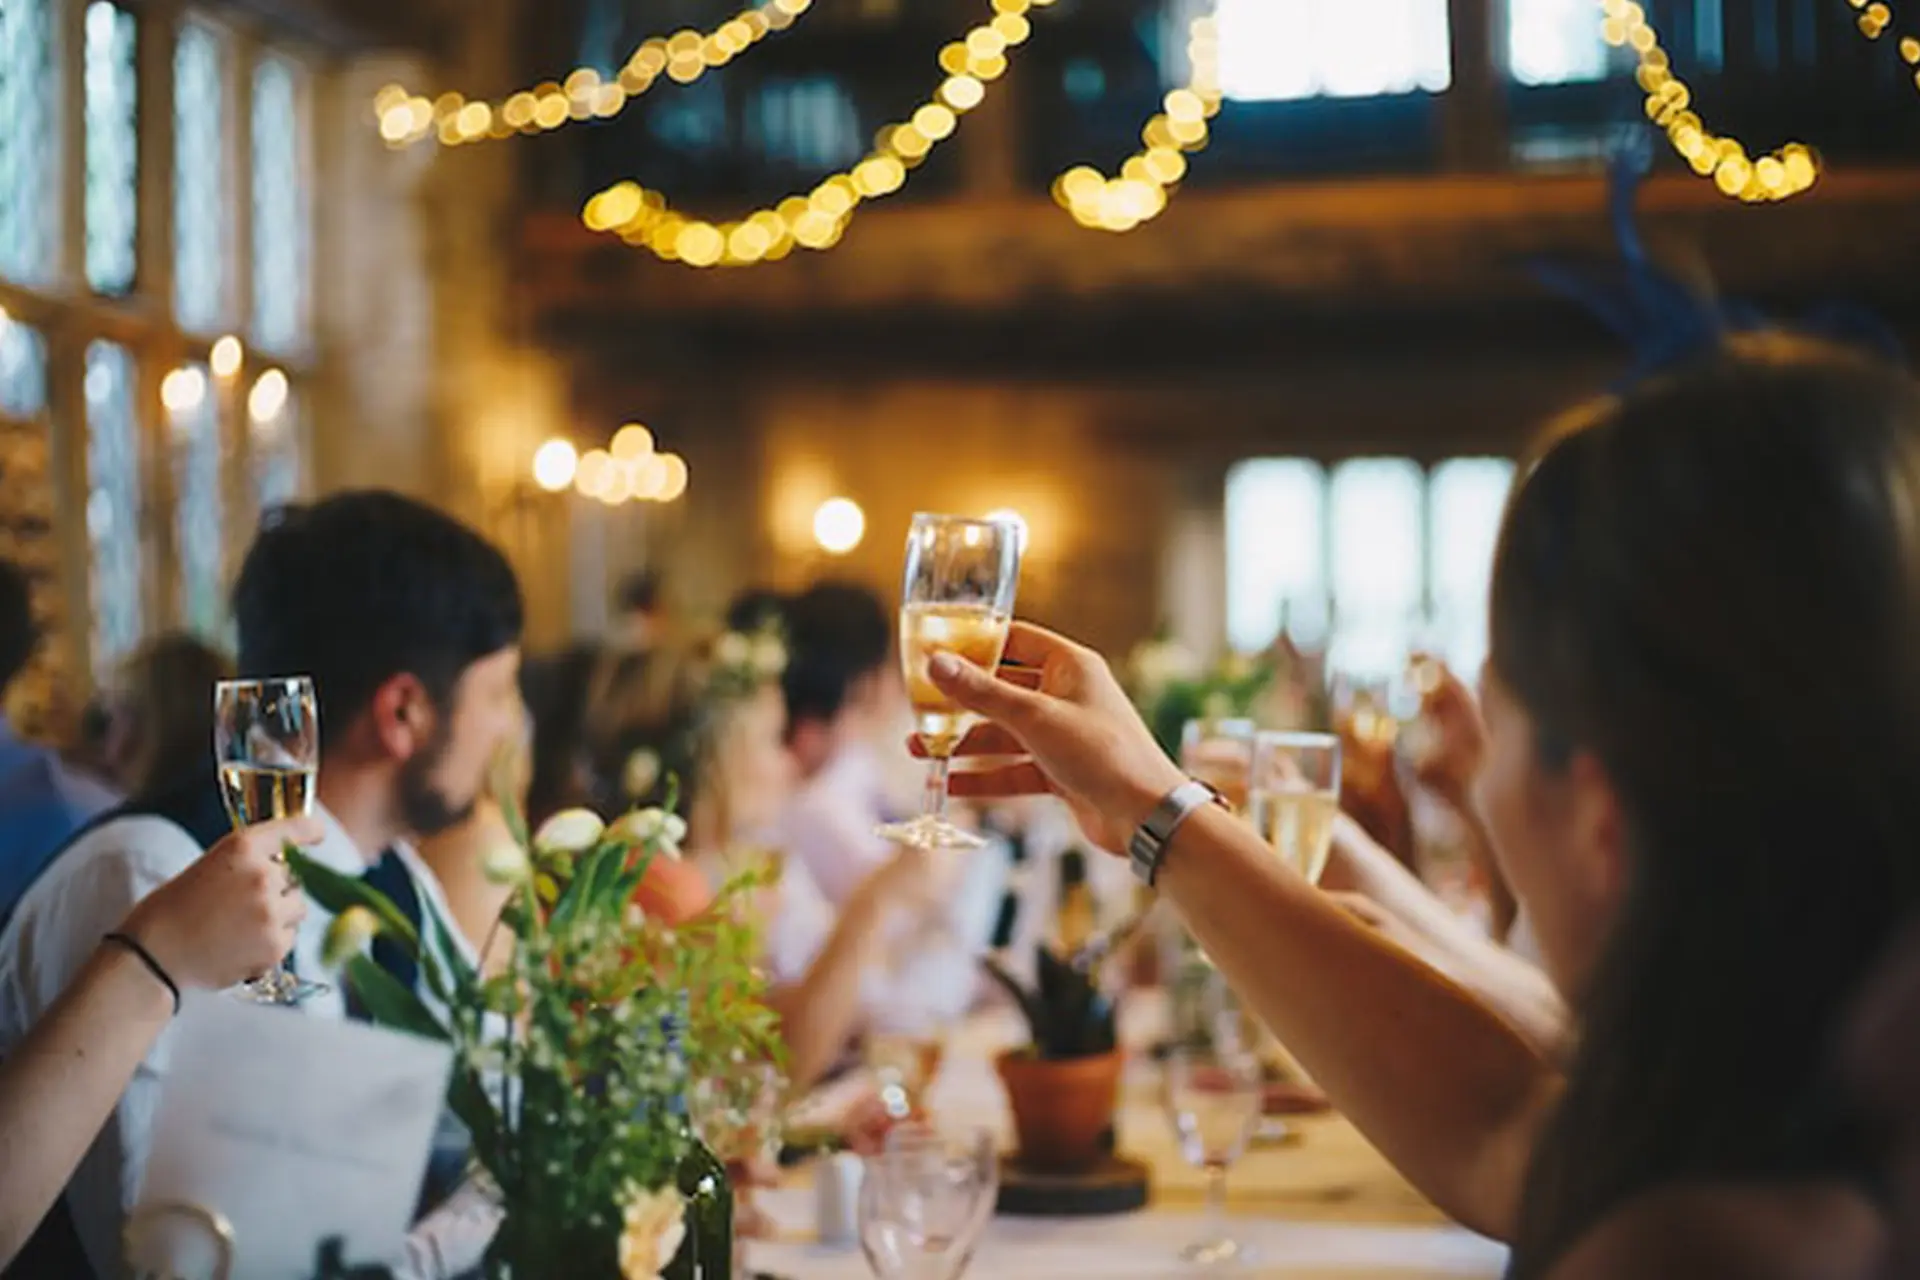 people holding champagne glasses celebrating together at a party